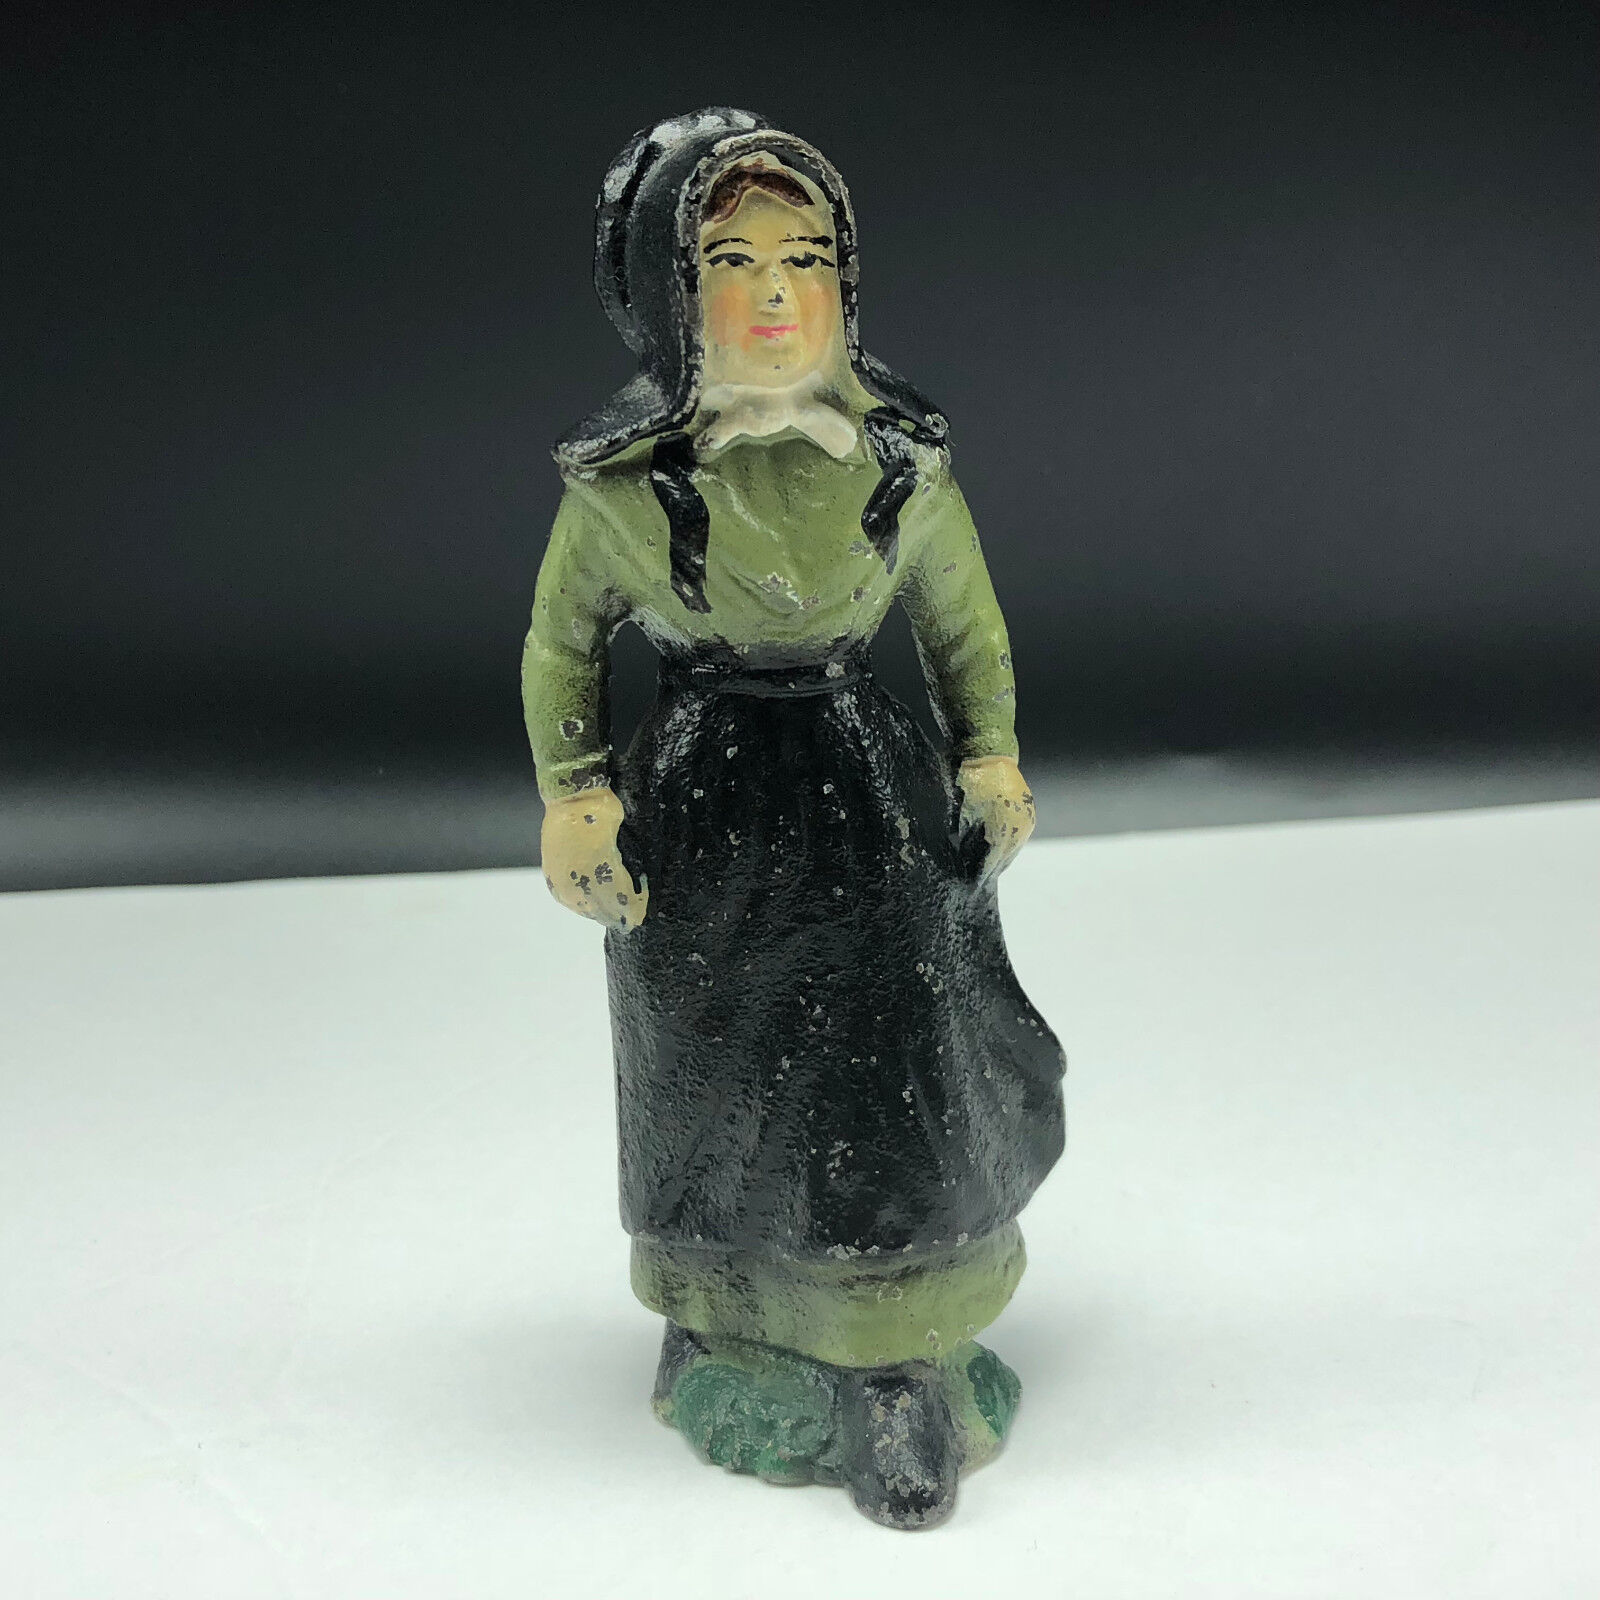 ANTIQUE CAST IRON TOY FIGURE Amish family statue pilgrim church mother green usa - $19.69